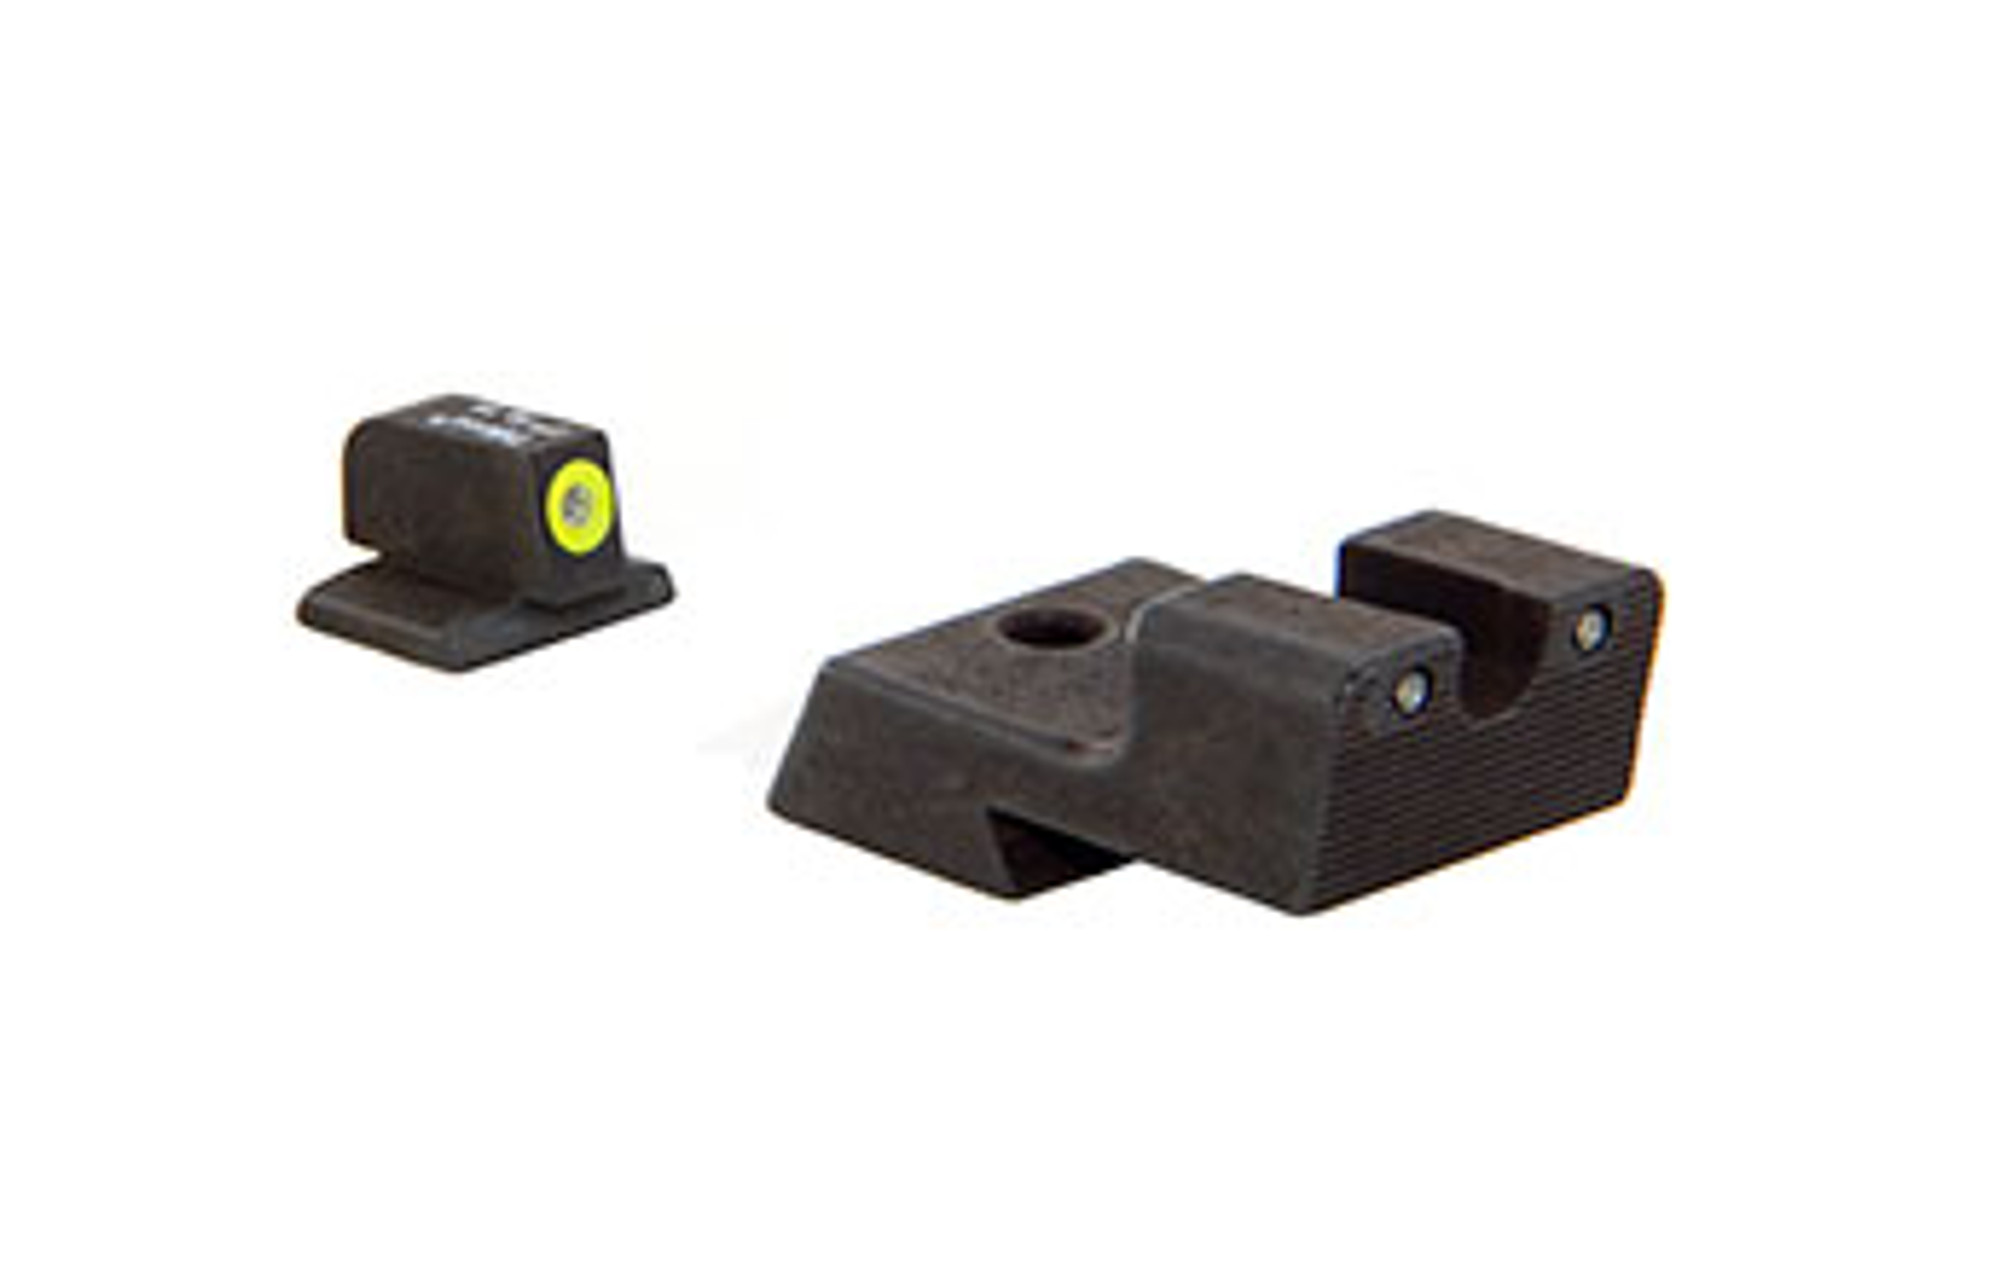 Trijicon 1911 HD Night Sight Set - Yellow Front Outline (fits Novak Low Mount Dovetail Cut)